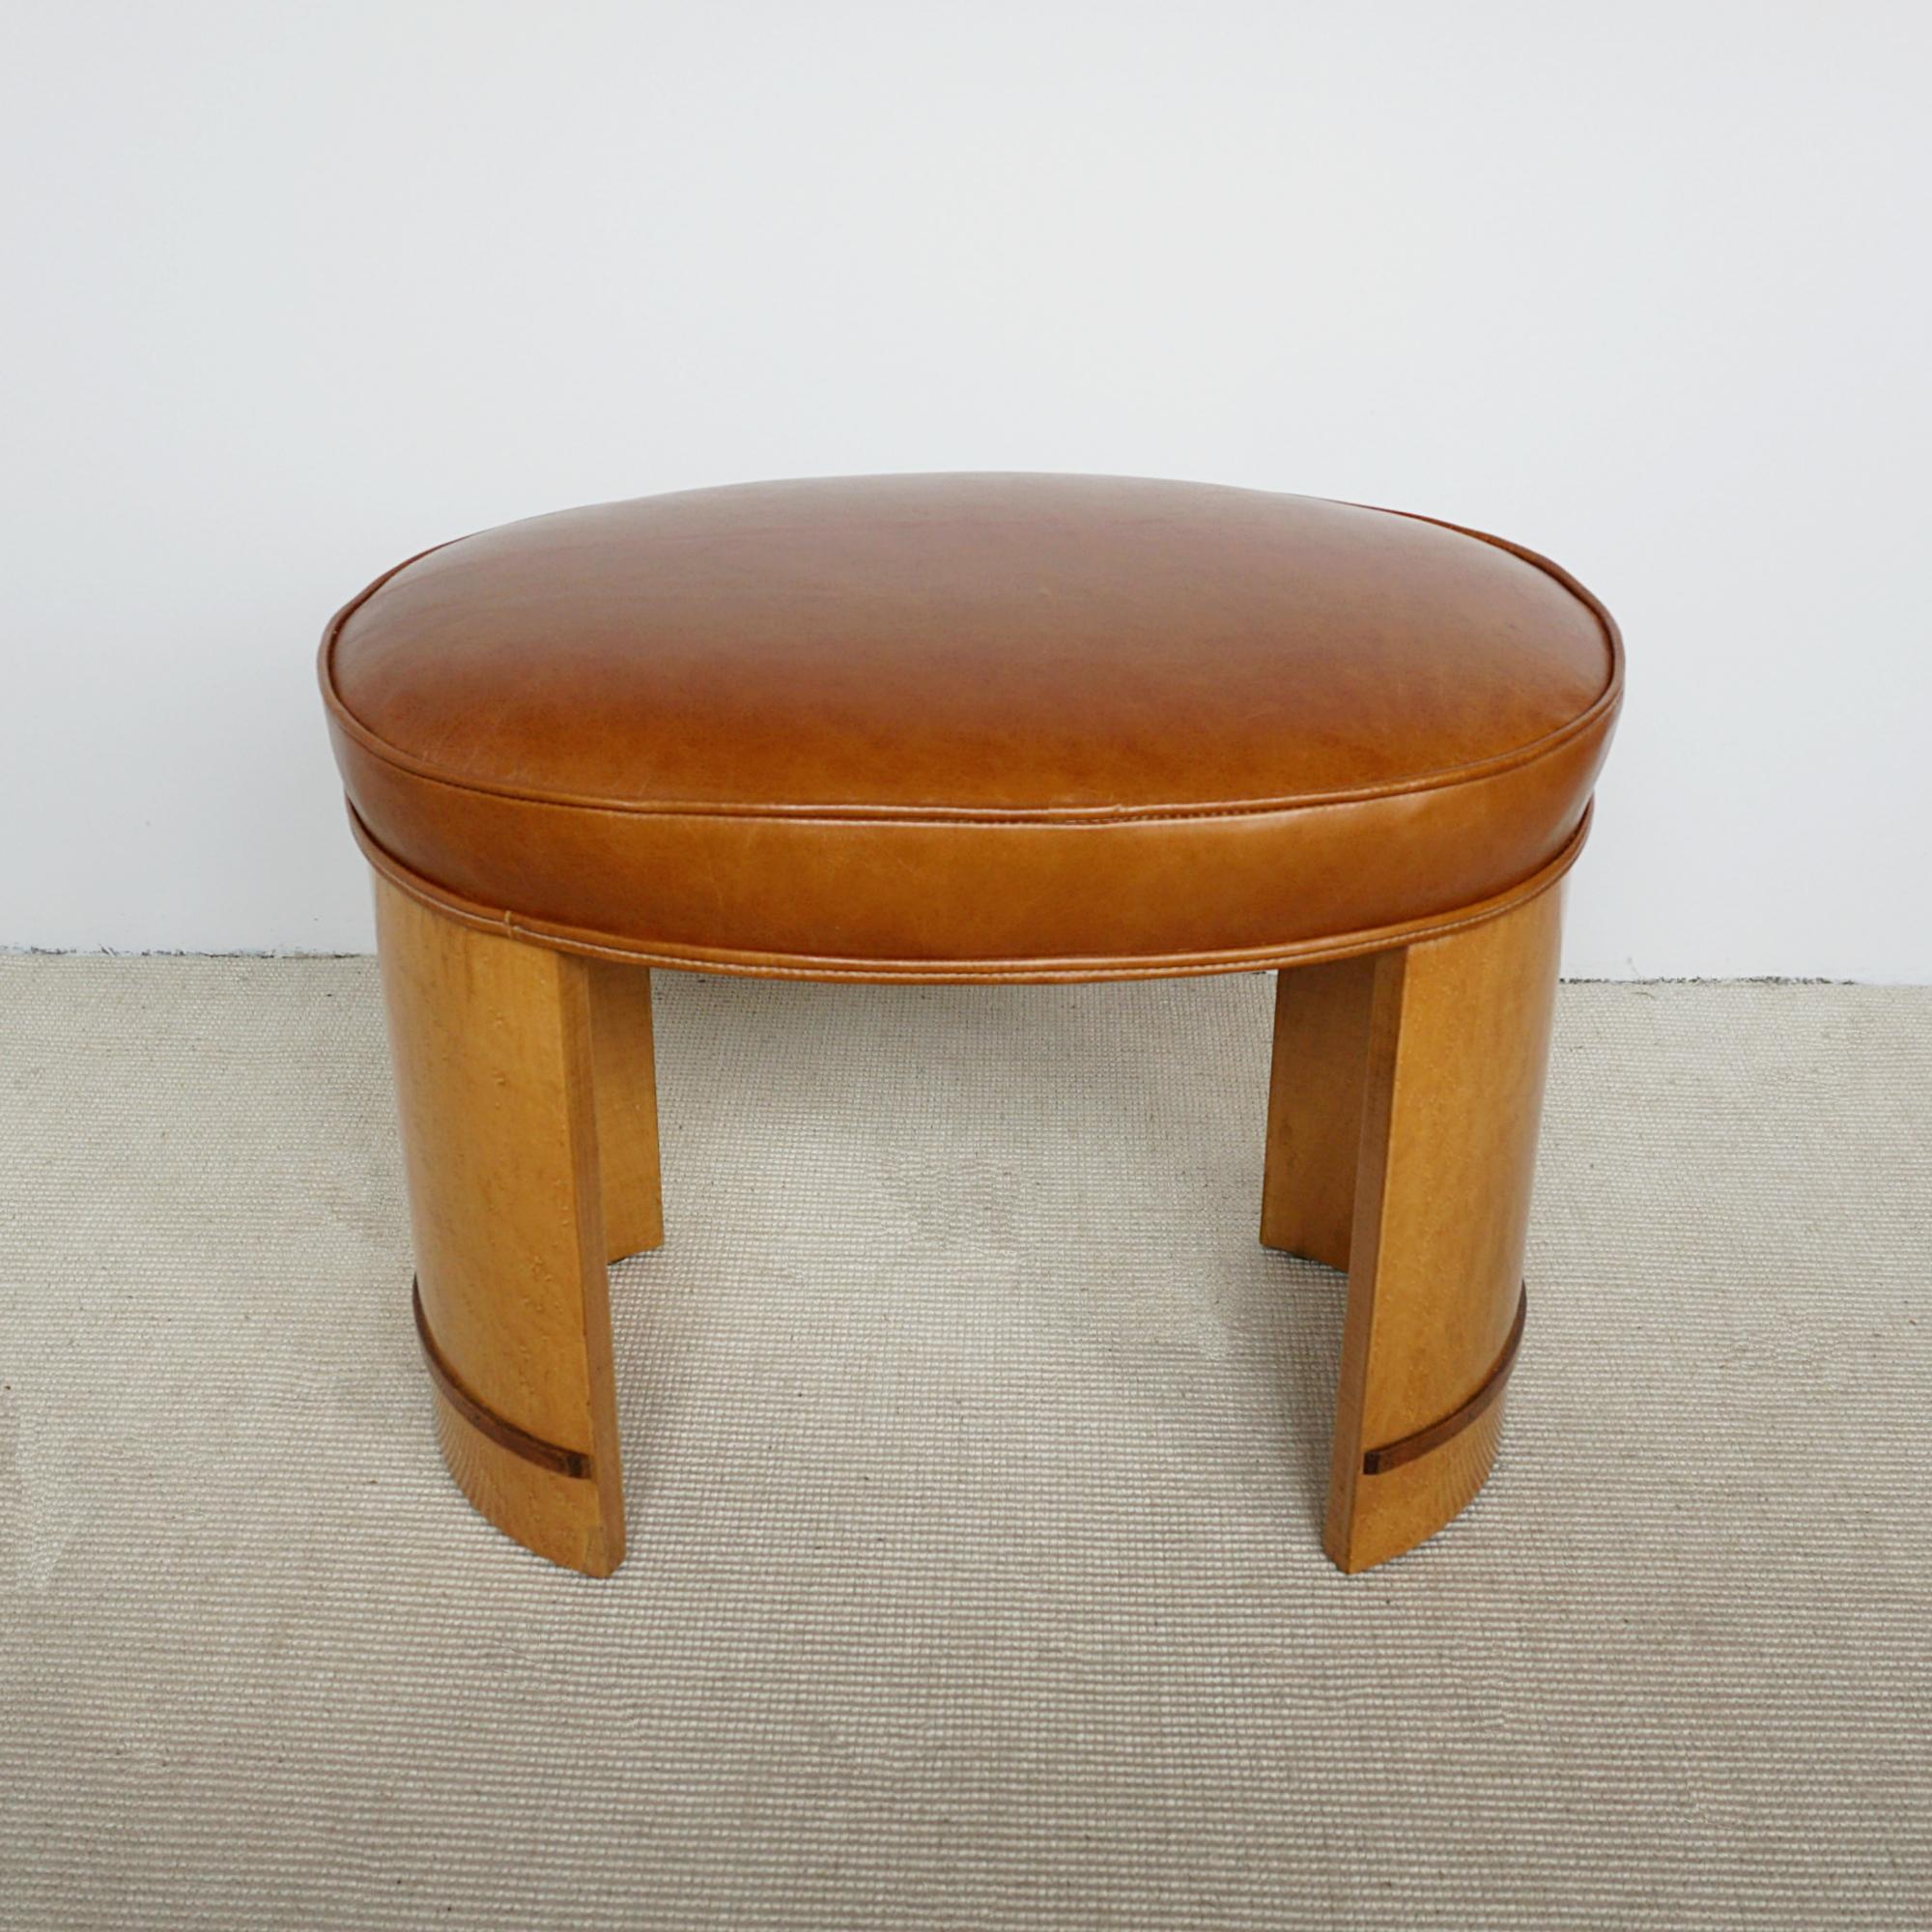 Art Deco Birdseye Maple Veneered Stool With Brown Leather Re-upholstery For Sale 2